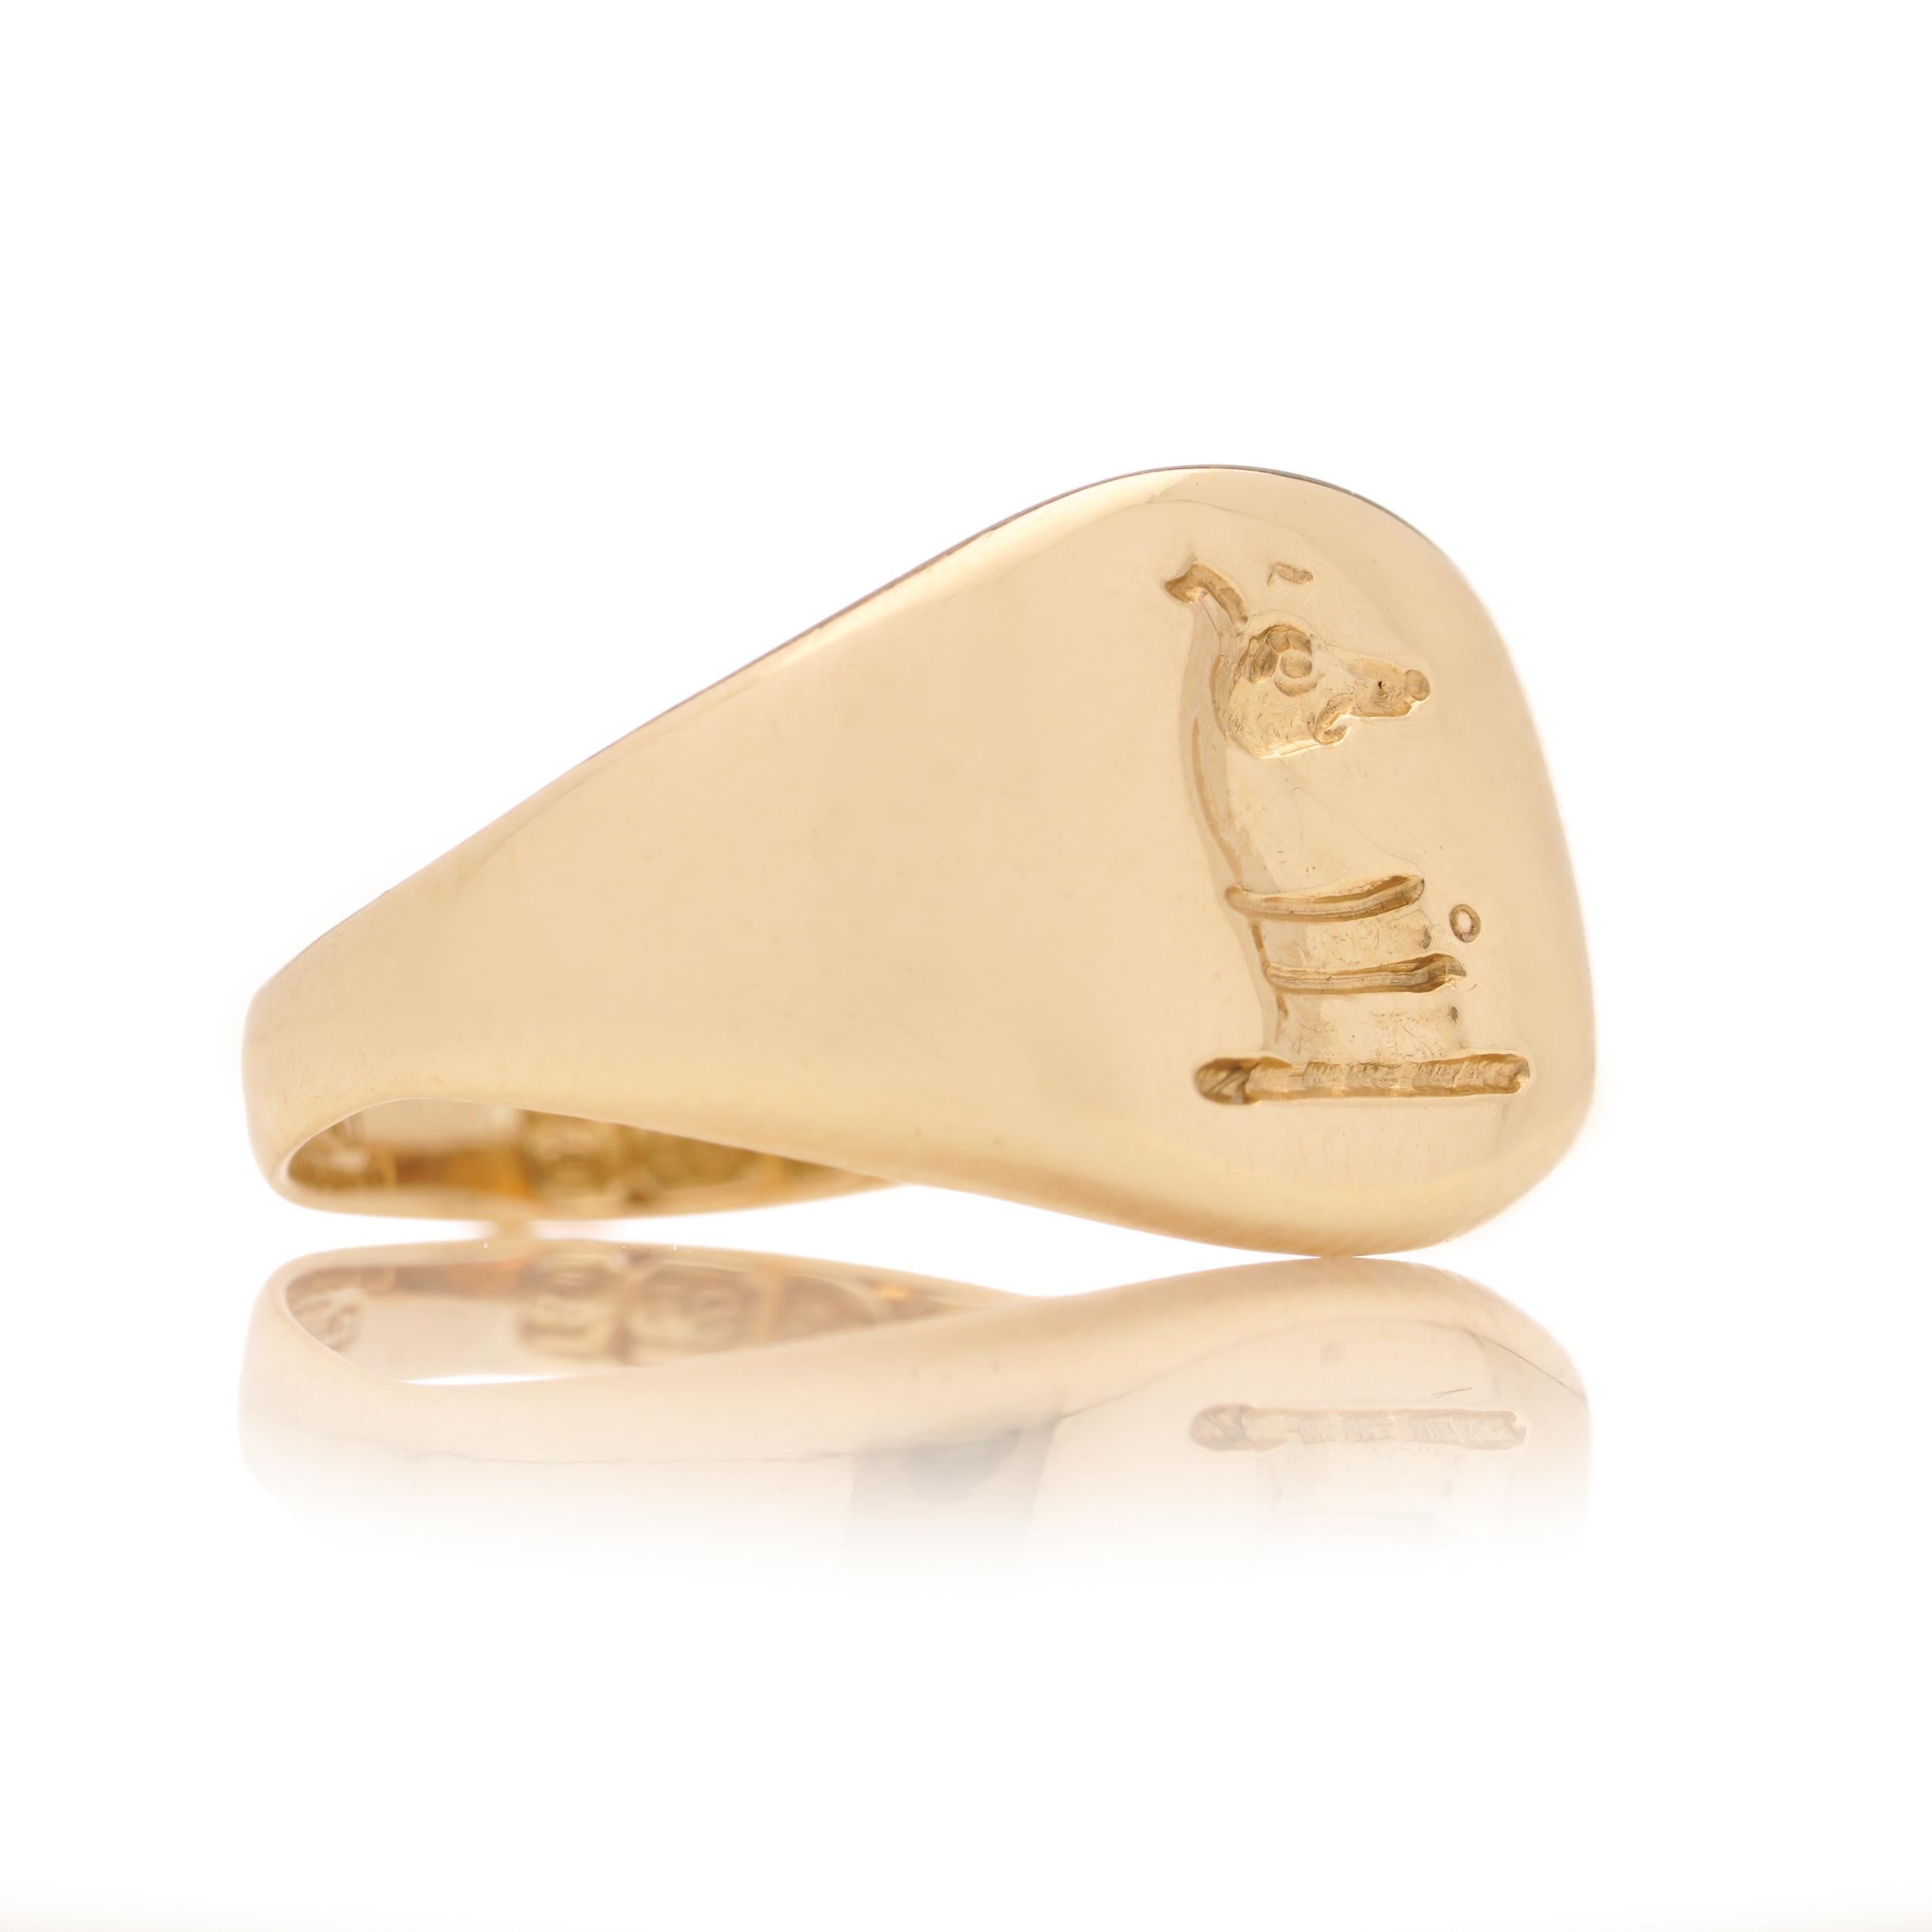 Edwardian 18kt. yellow gold pinky signet ring featuring a dog 4